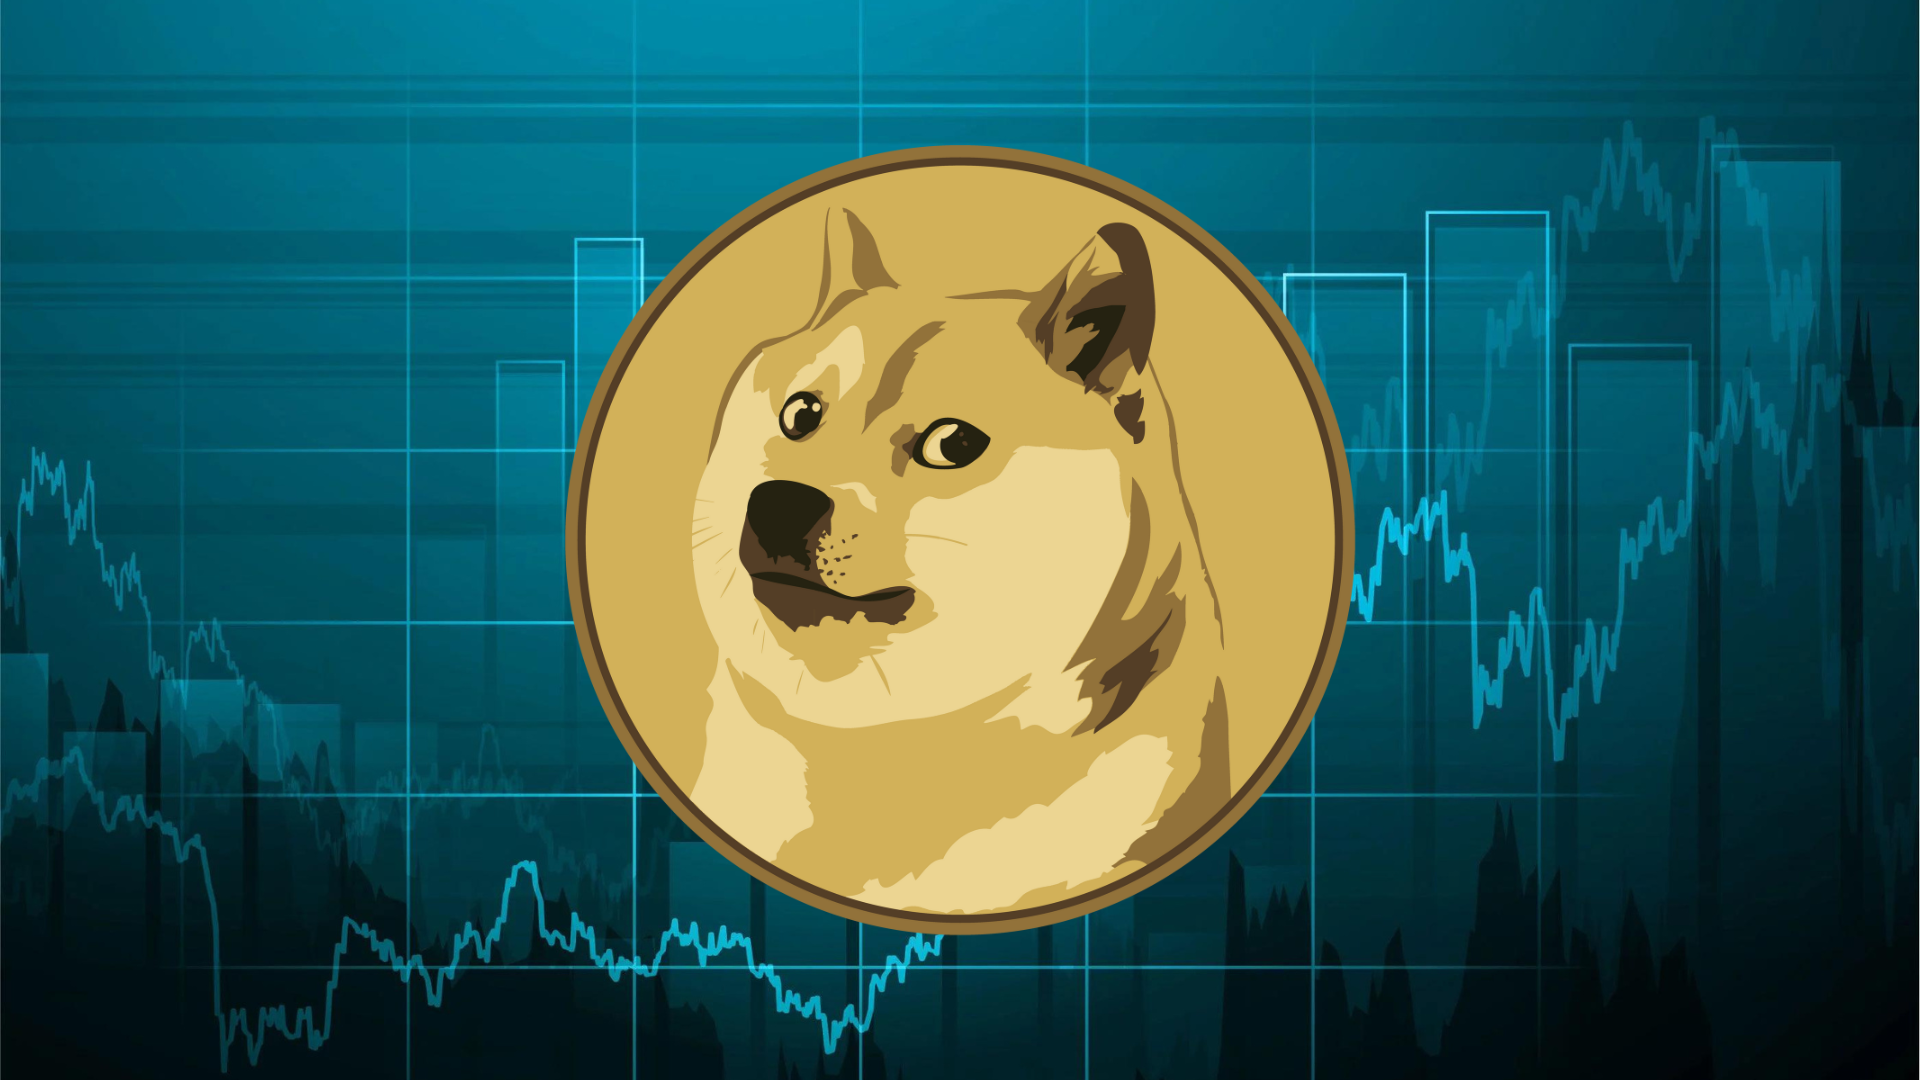 Dogecoin Price Prediction: Doge Pumps 10% As Elon Musk Sees Tesla Purchases With Dogecoin, But Traders Flock To This ICO For 10X Gains On The Bitcoin Halving